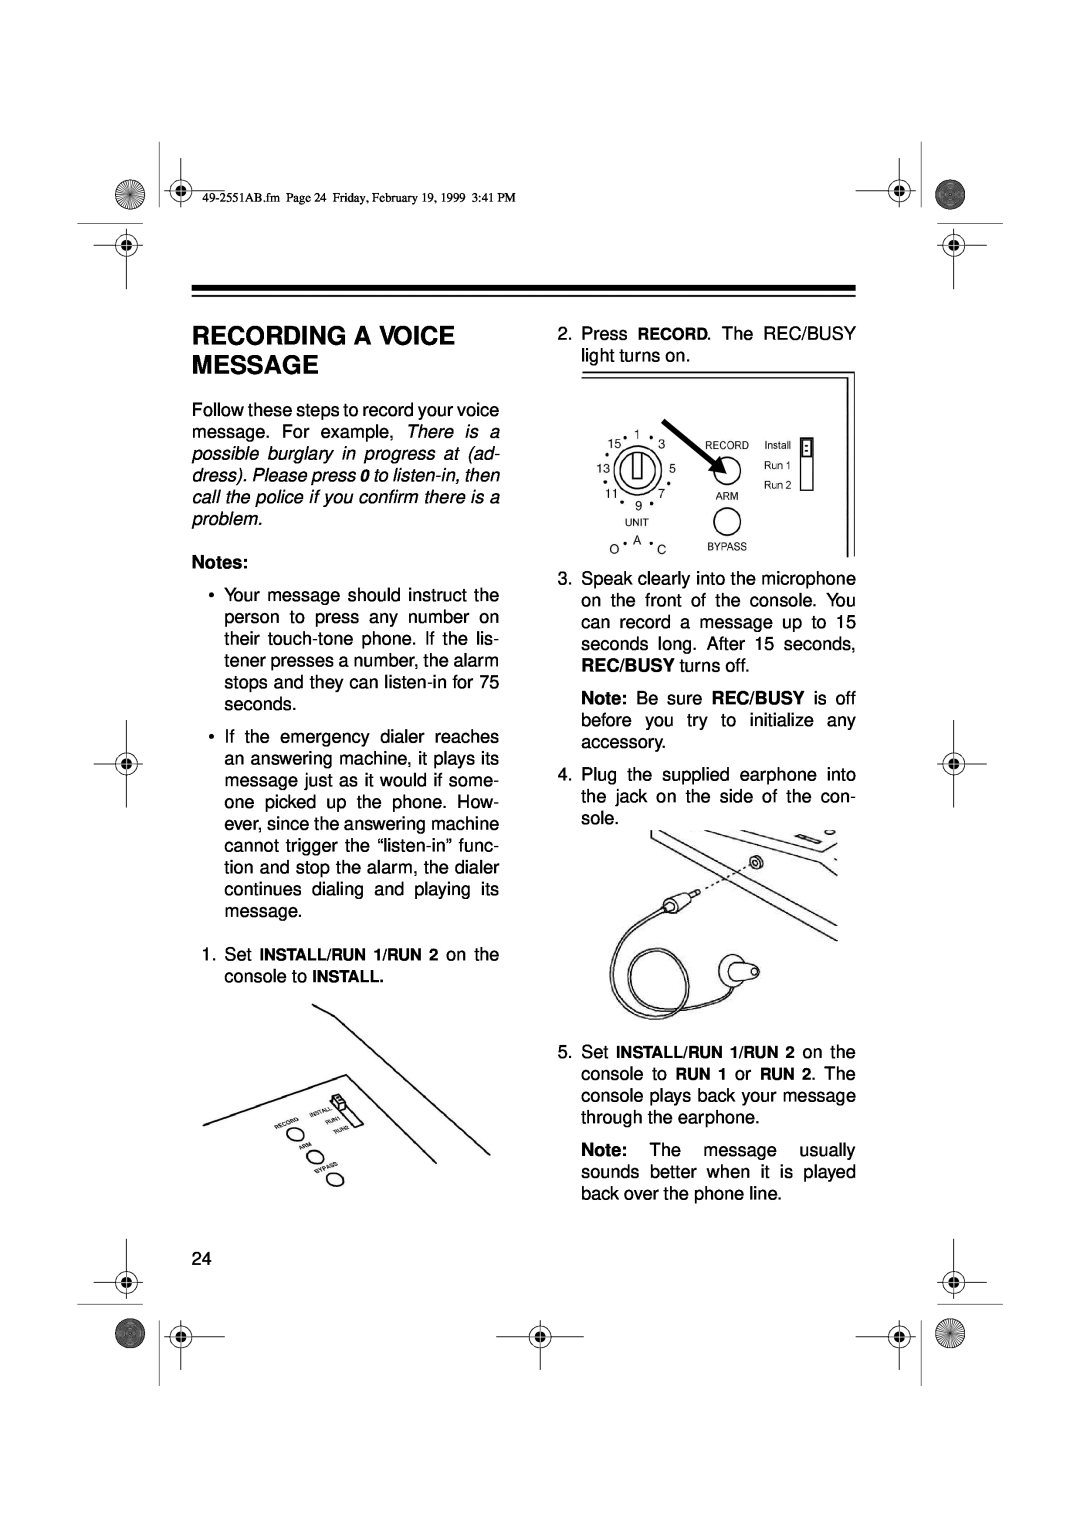 Radio Shack 49-2551A owner manual Recording A Voice Message 